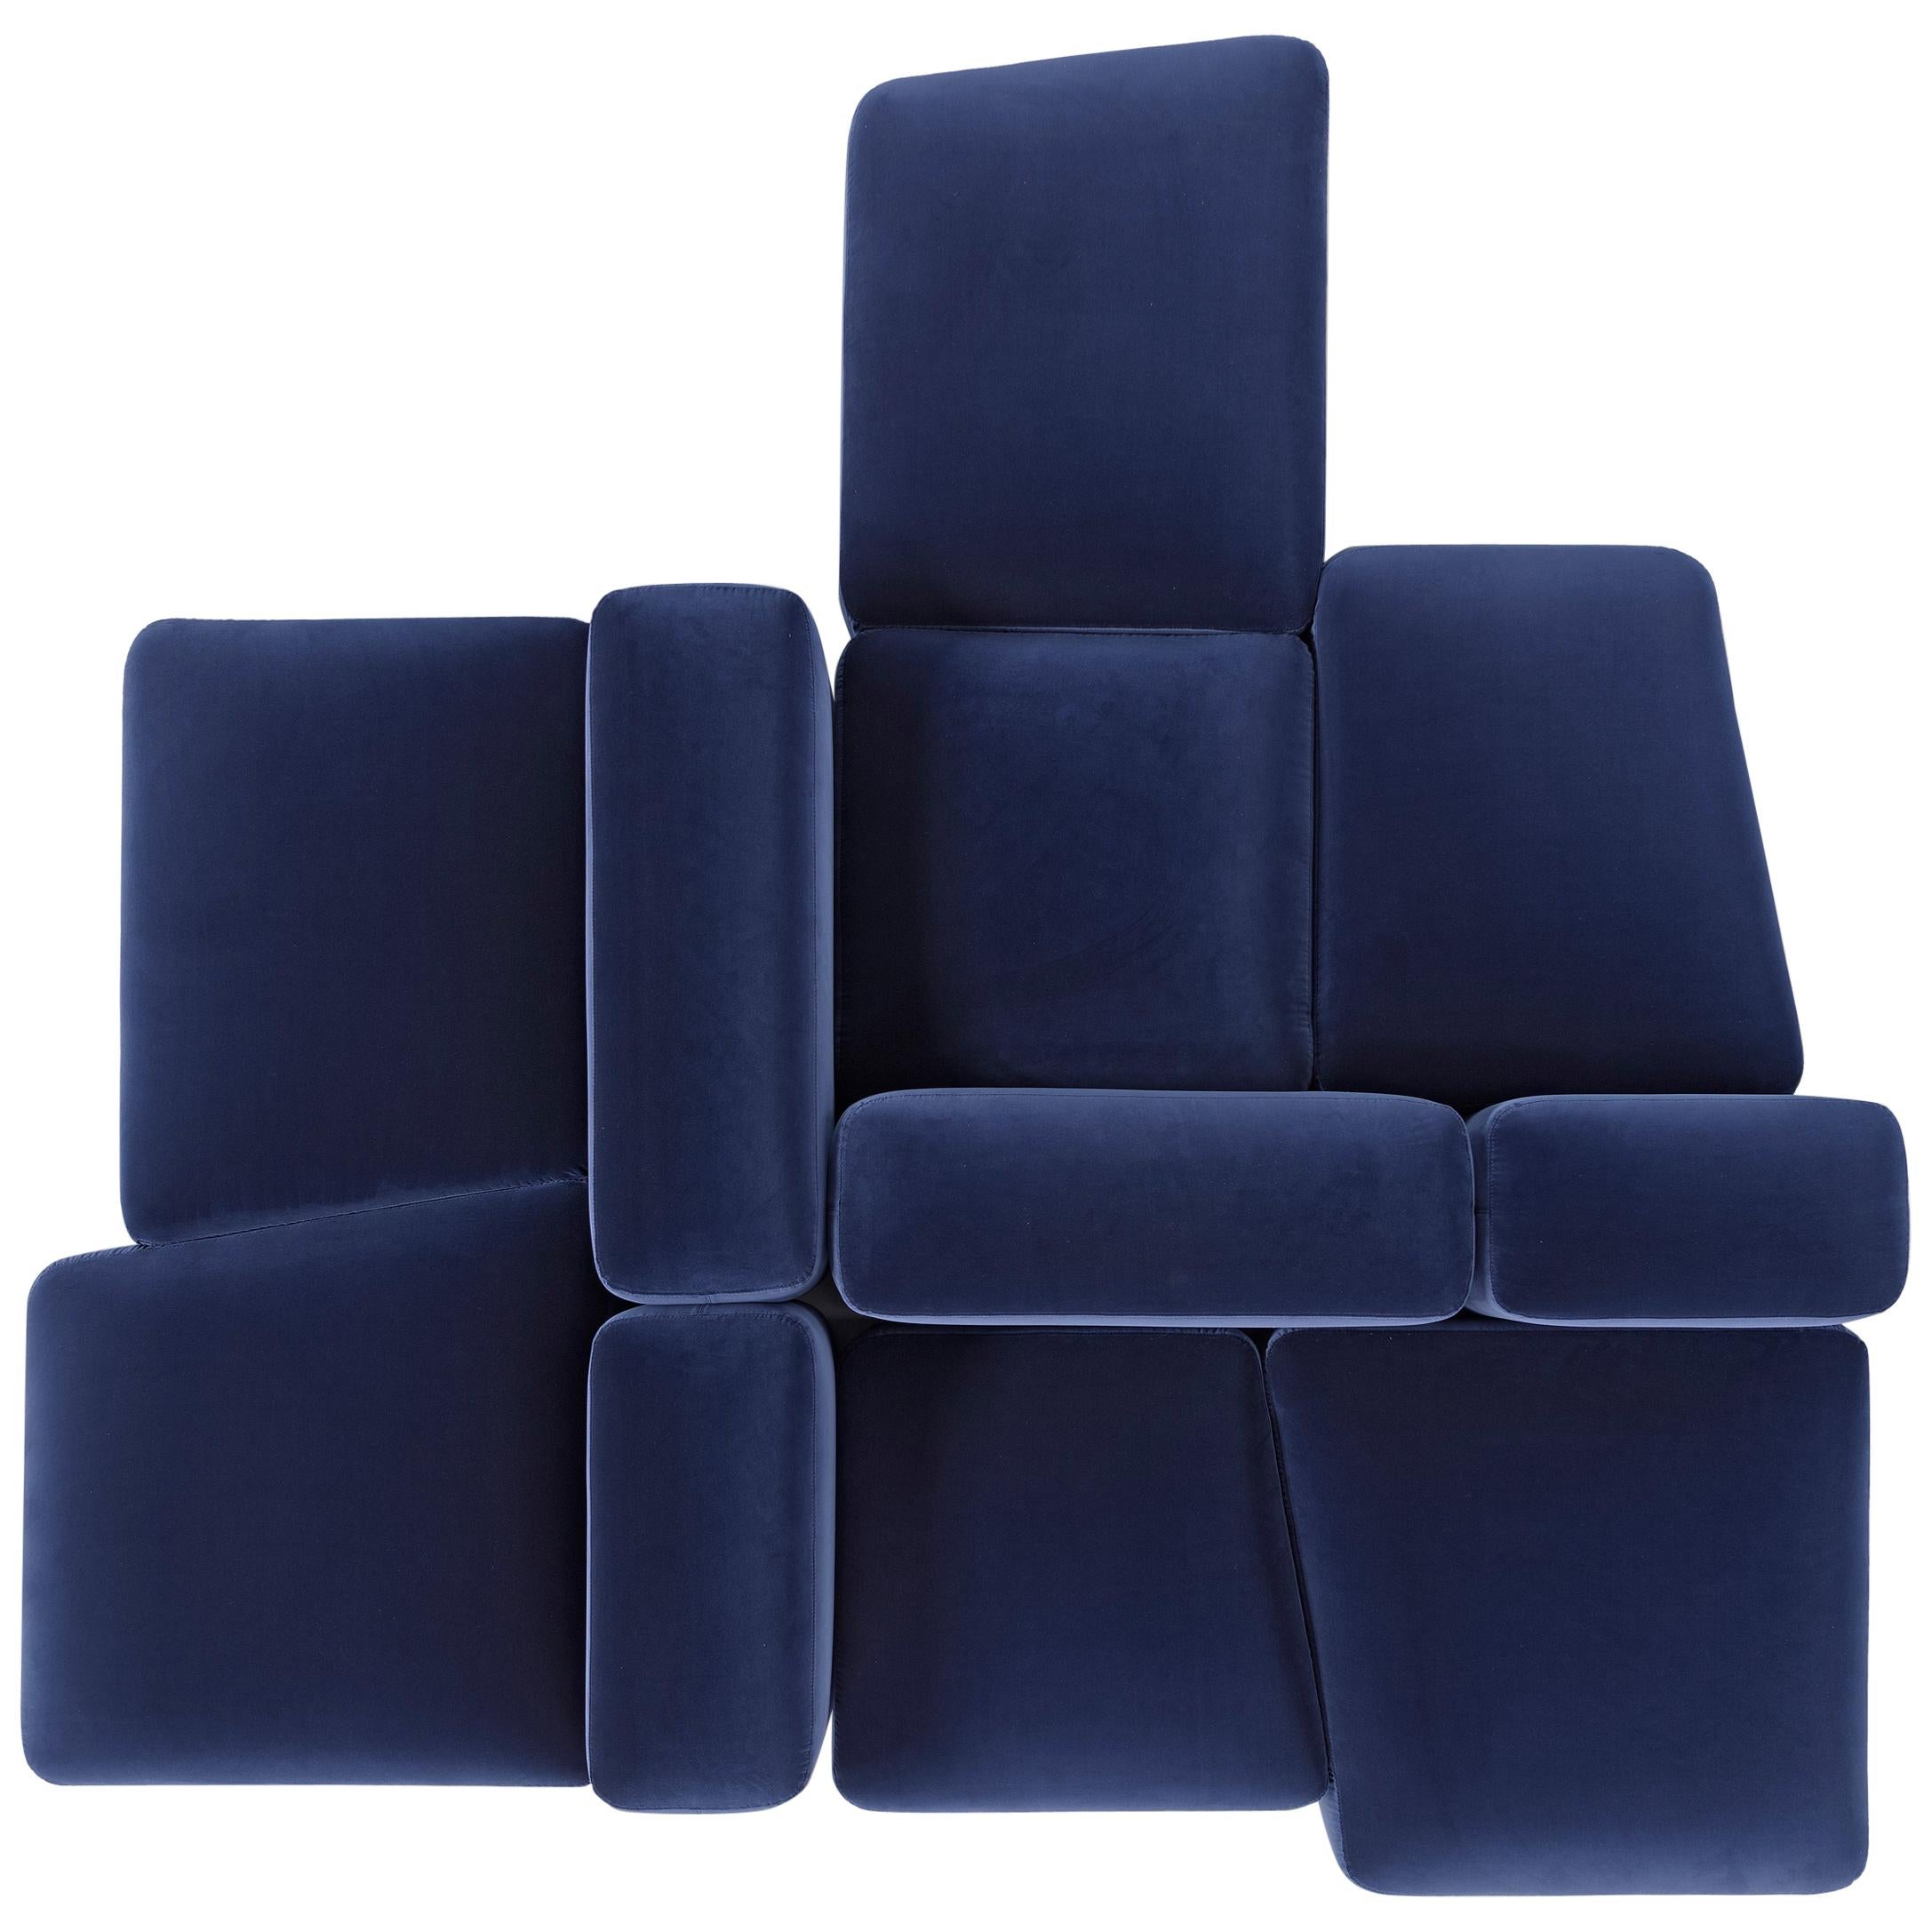 Modular and Customizable Sofa 'Lapis' E027 'Many Layouts and Fabrics Available' For Sale